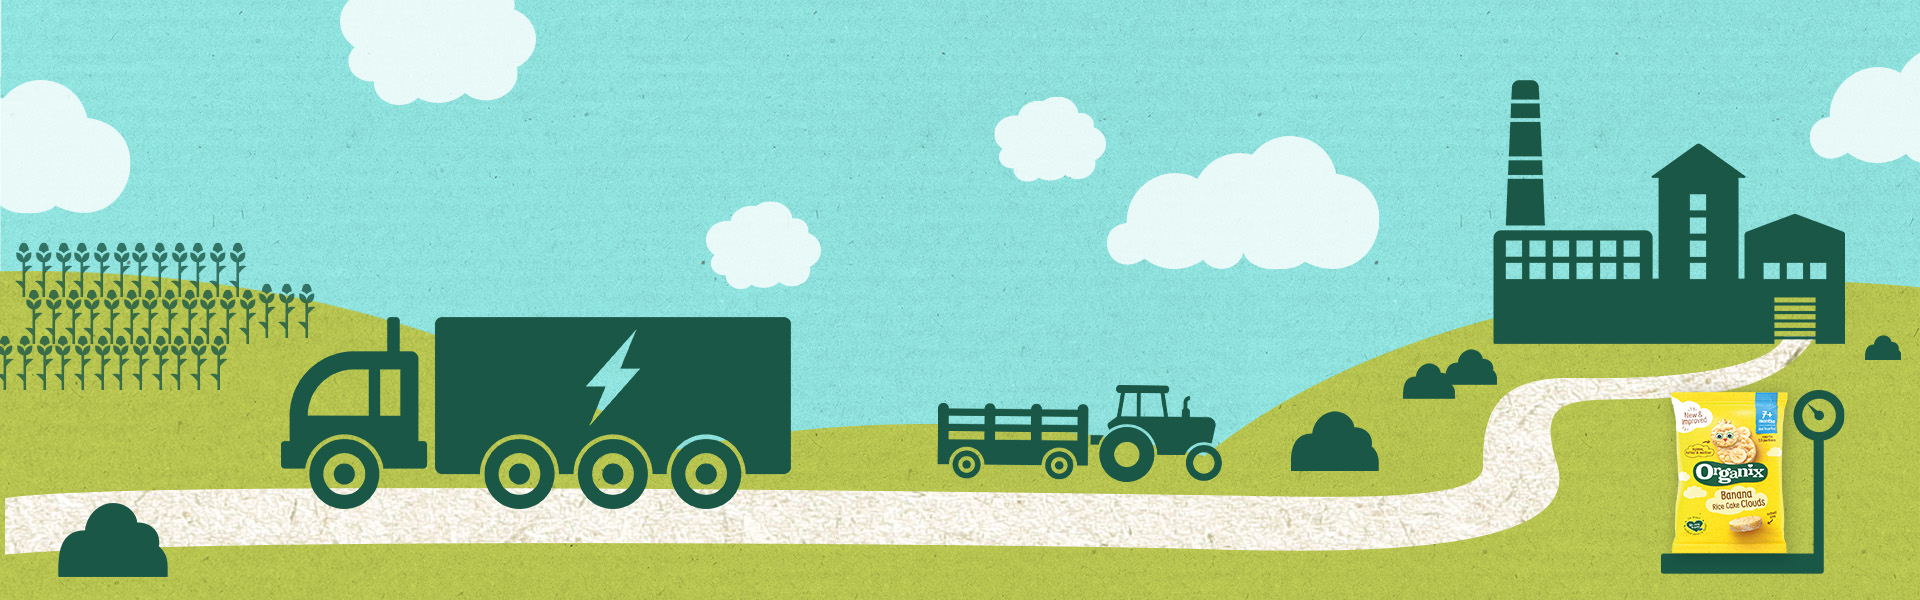 illustrated electric truck, factory, tractor on beige path with green grass and blue sky with clouds and crops in the background